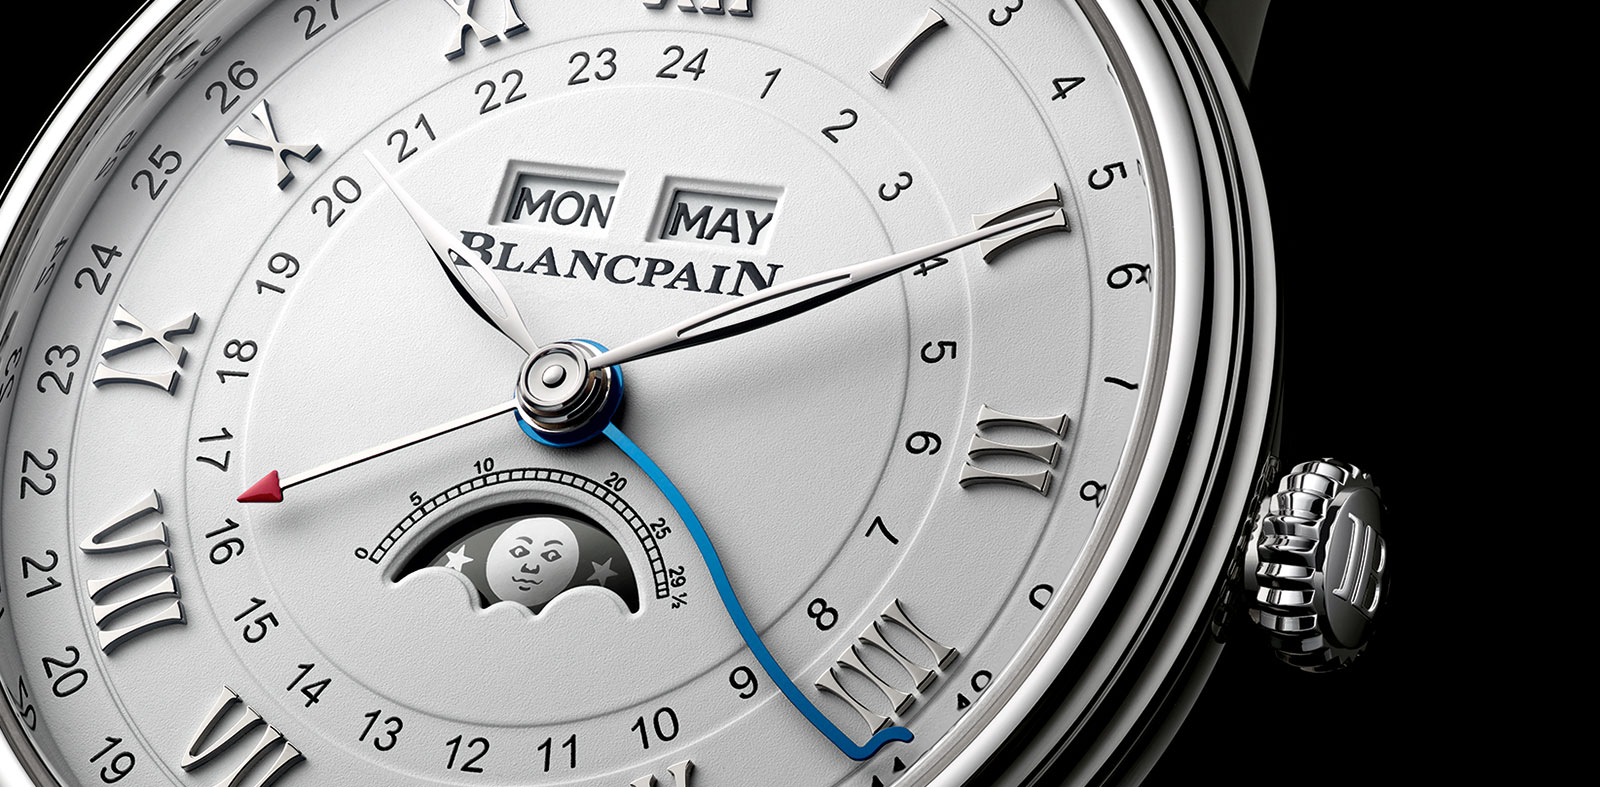 Baselworld 2018: Blancpain’s Complete Calendar Gets a Second Time Zone ...